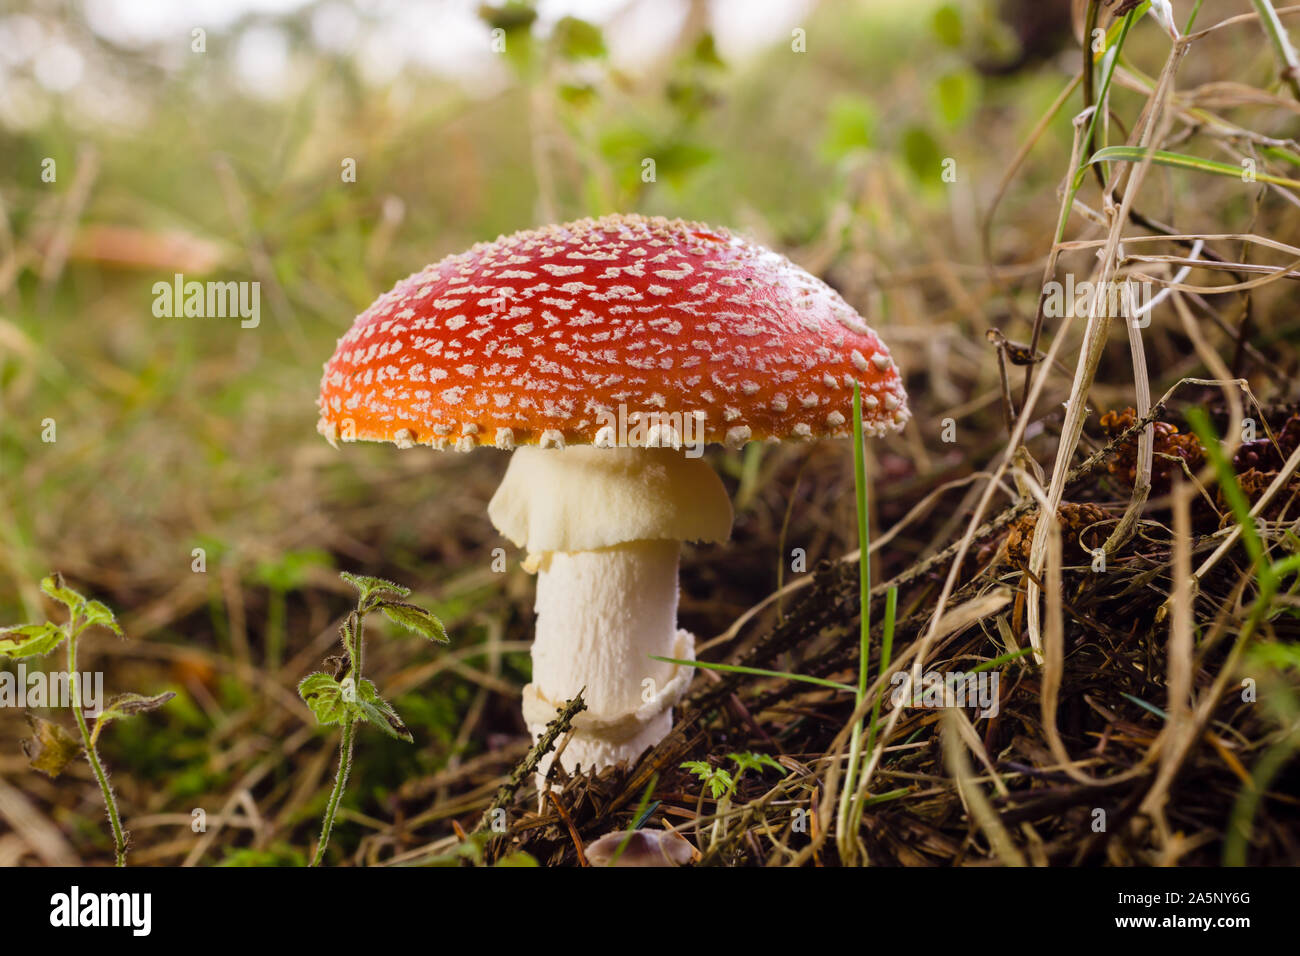 Fly Agaric or Amanita muscaria a poisonous mushroom with a red cap and white spots common in coniferous and mixed forests Stock Photo